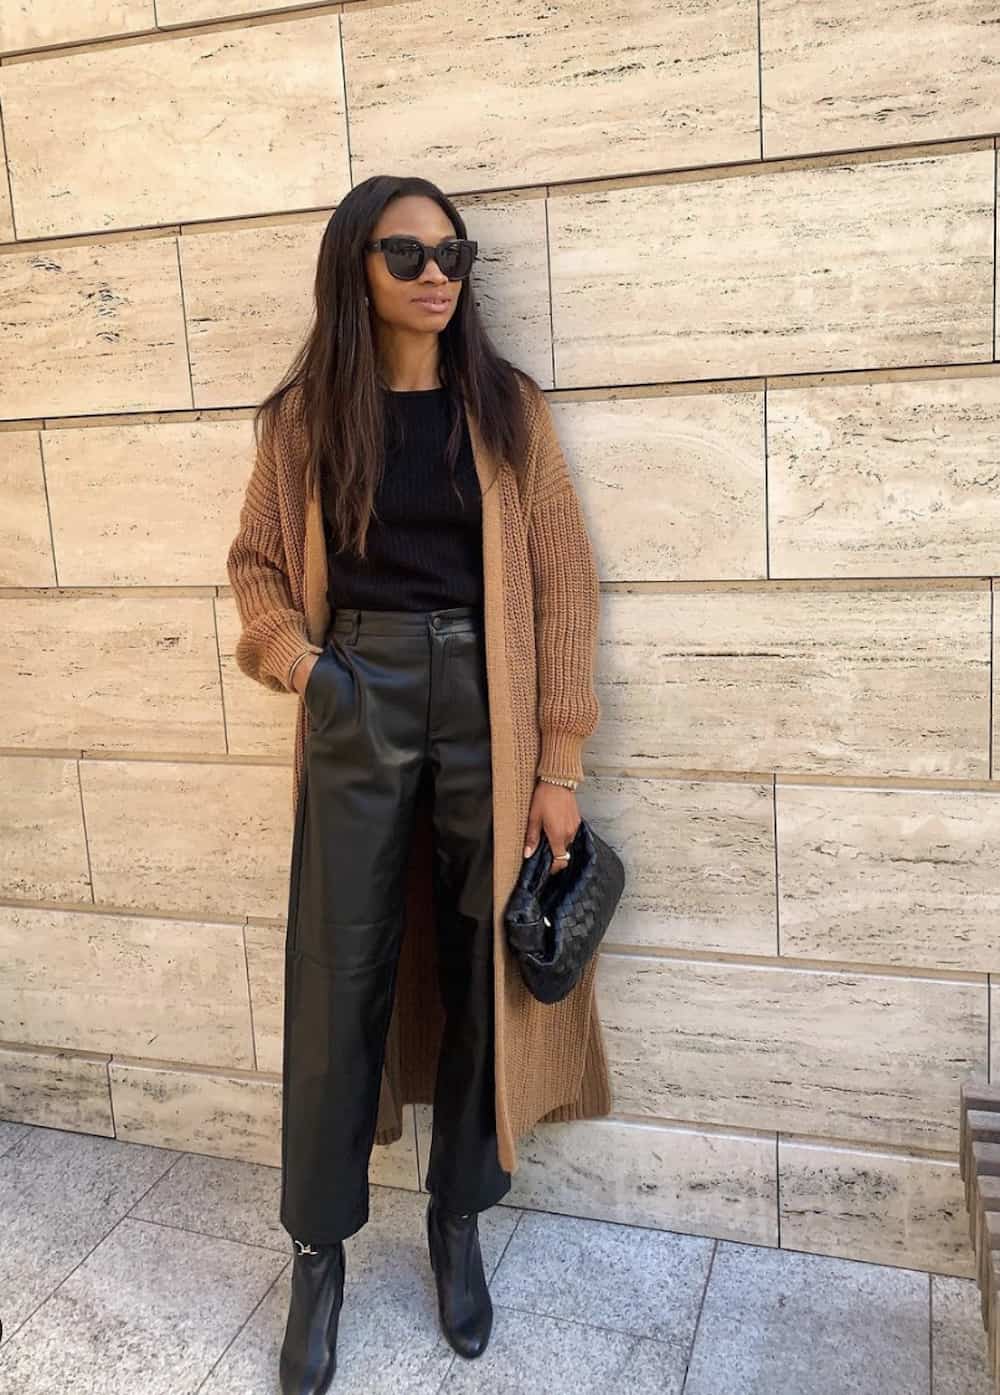 image of a black woman wearing a long camel cardigan, black top, black leather trousers, and black ankle boots